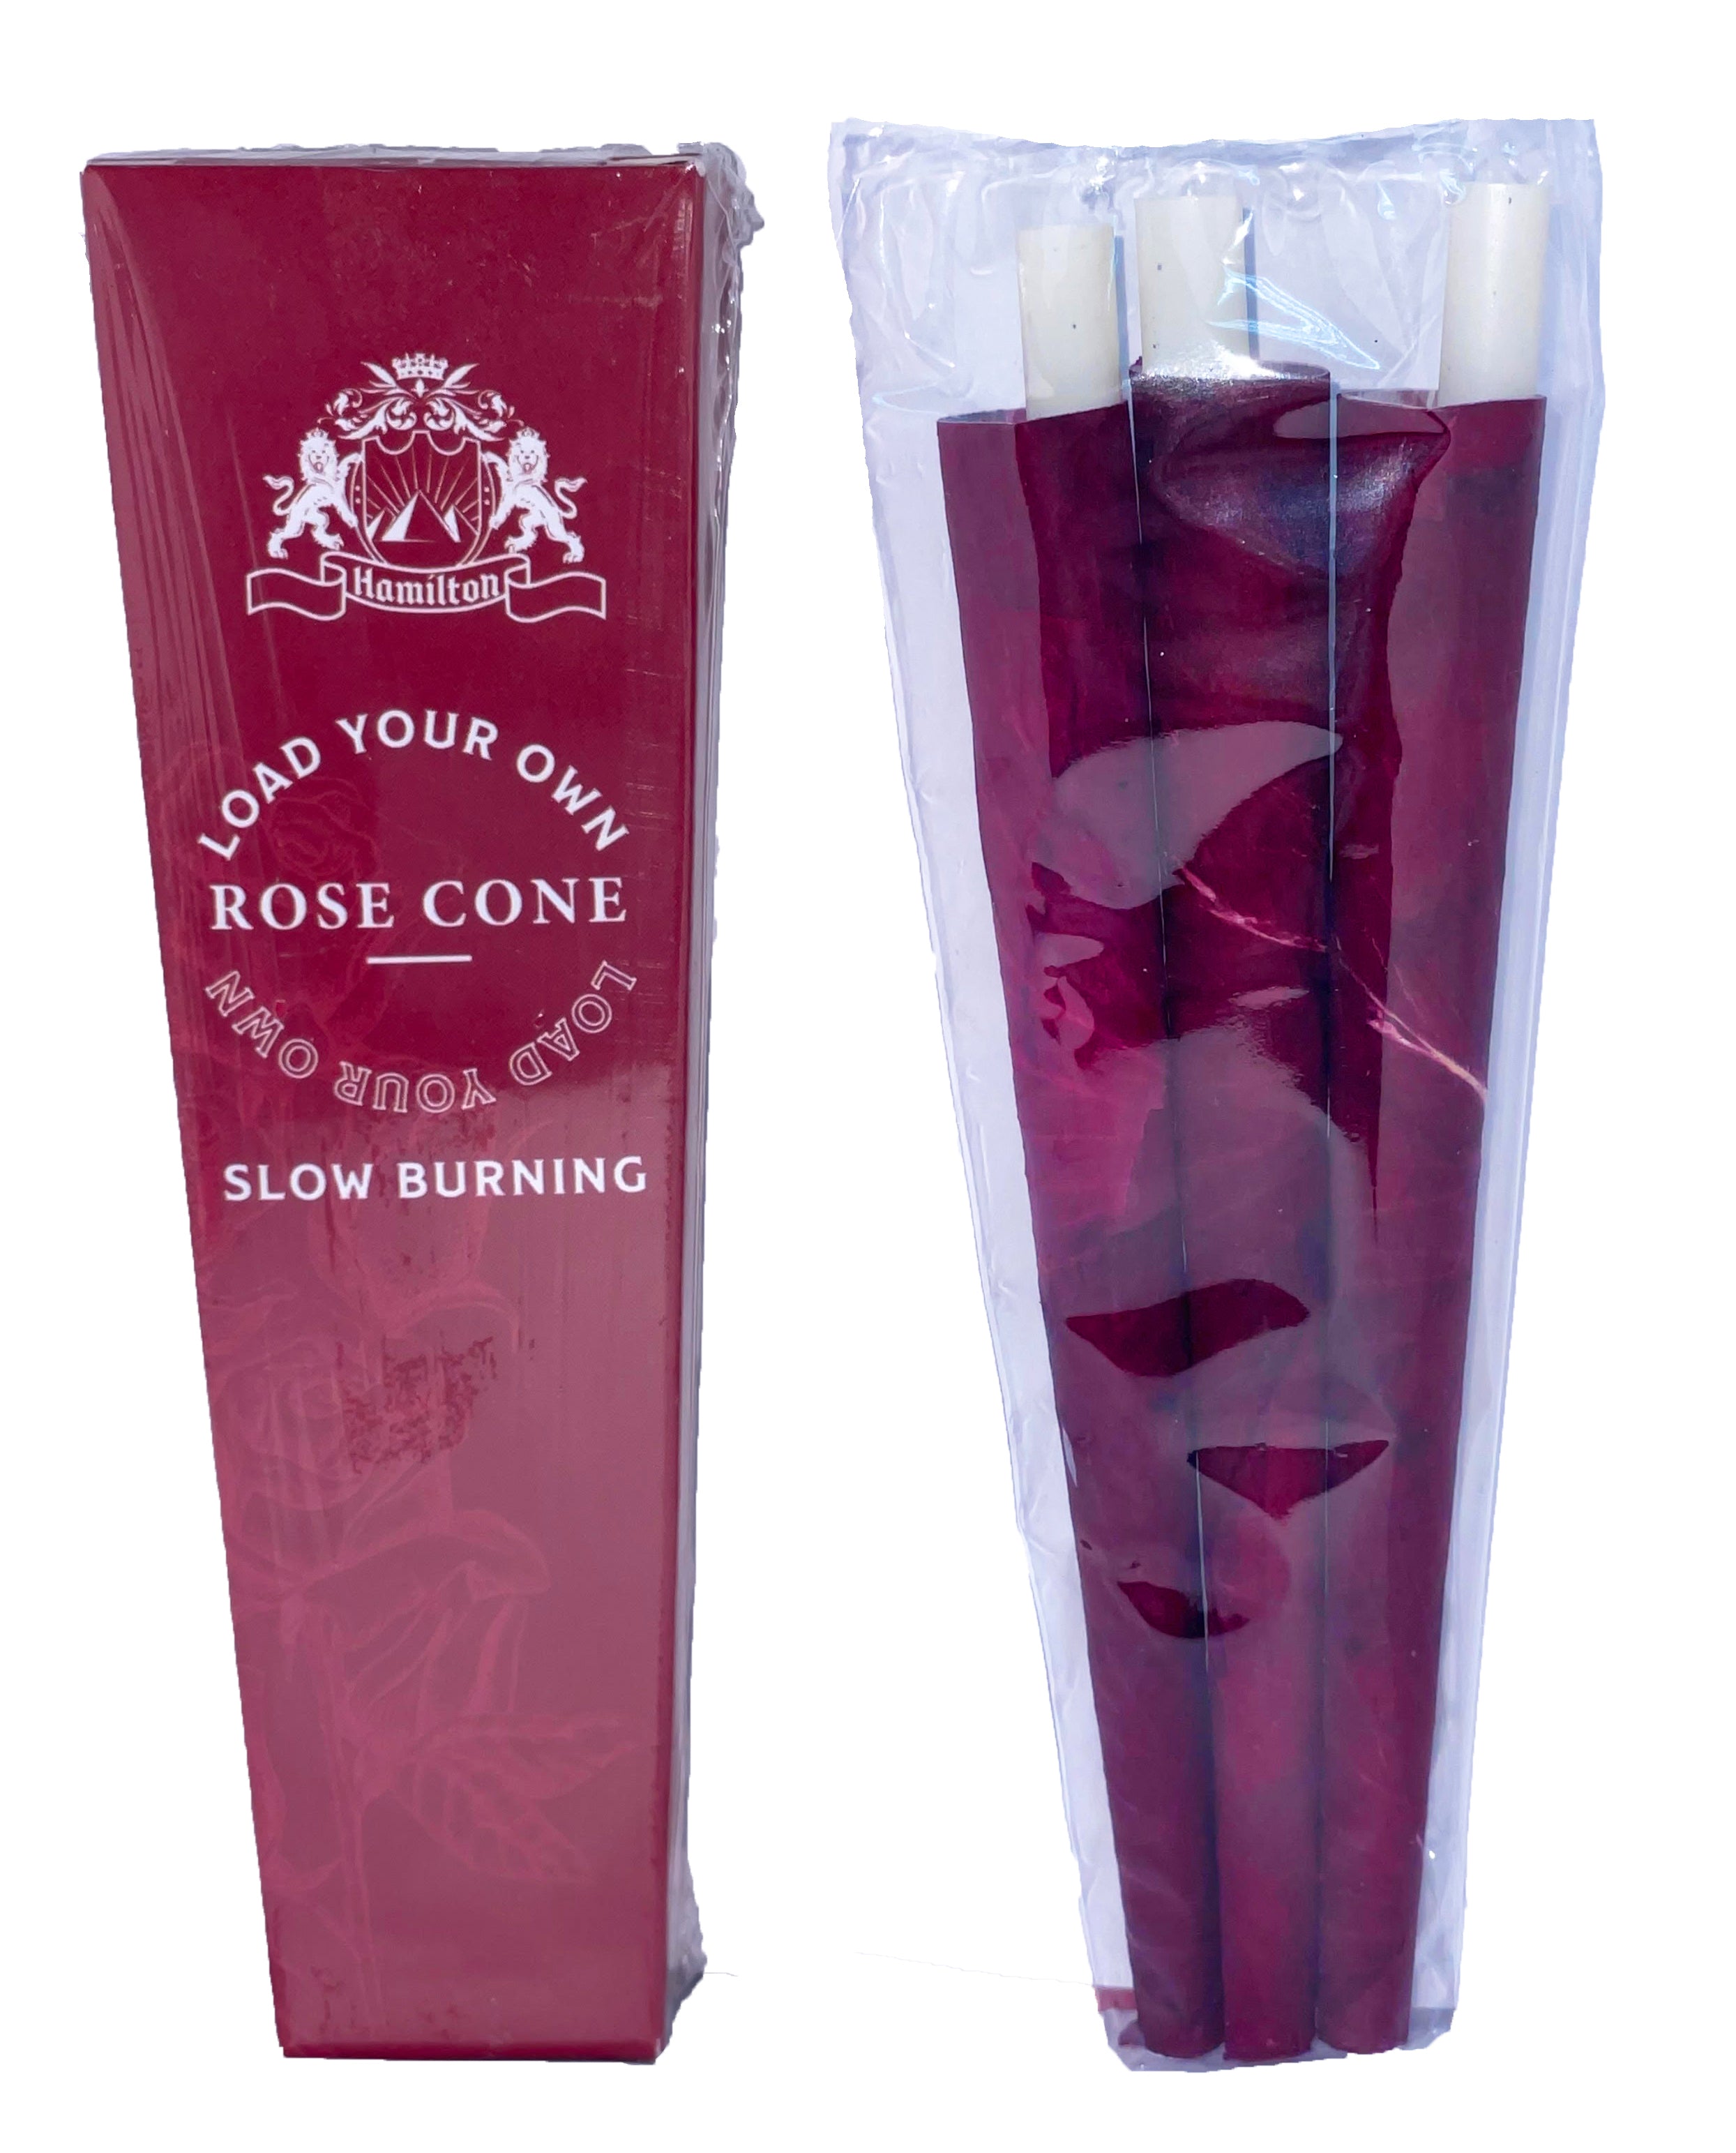 3-pack Rose Petal Cone. Each Rose Cone is rolled with organic roses. We test our roses for chemicals every harvest.